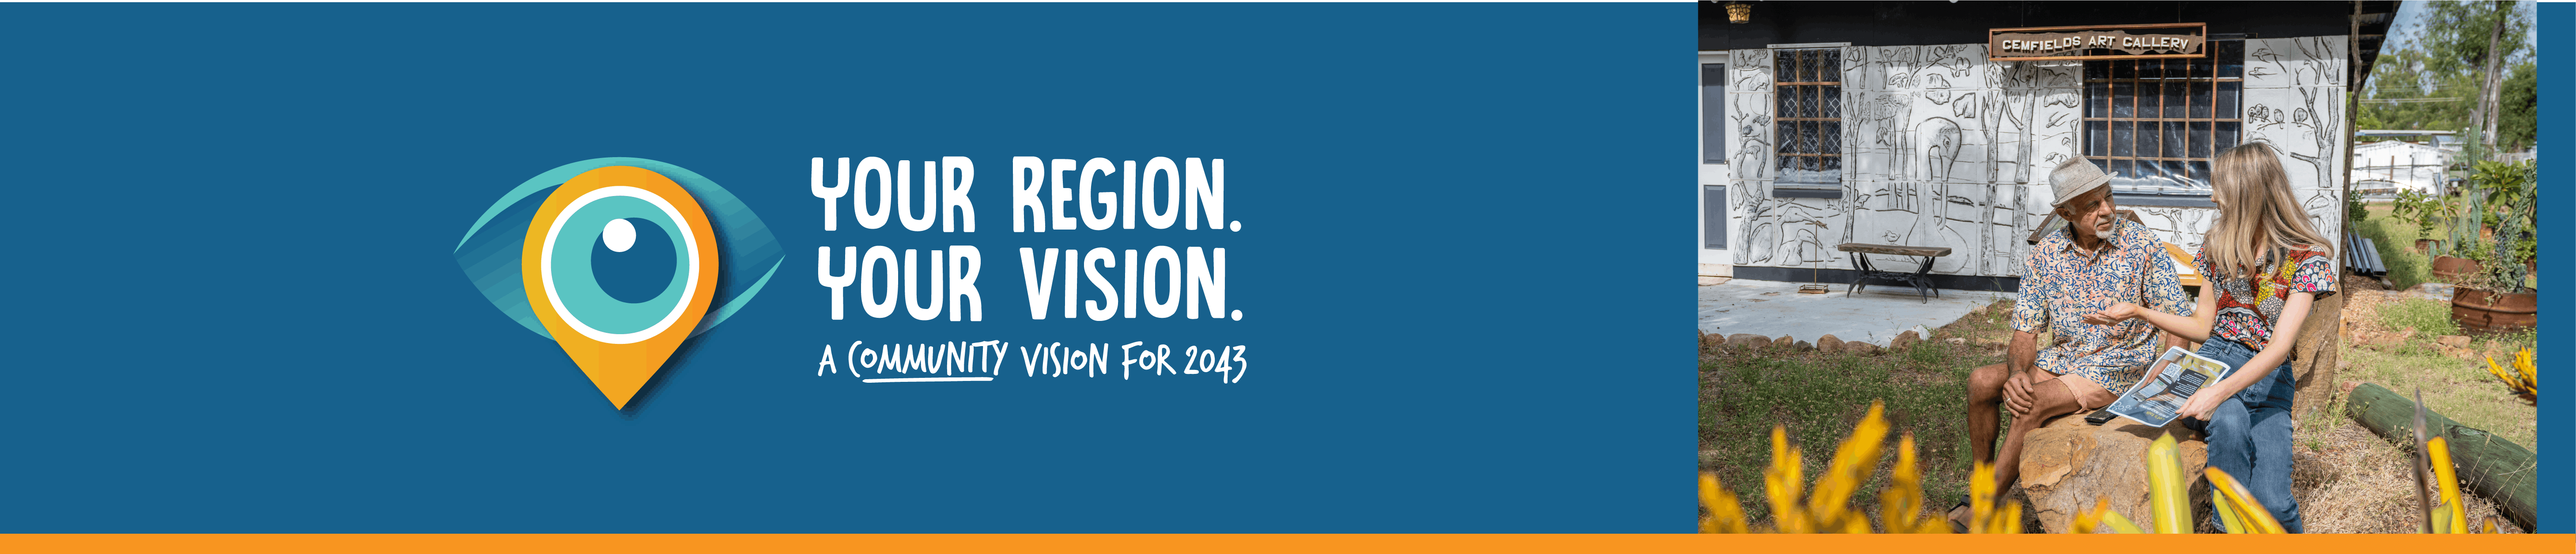 Header image: Dark blue background with photo to right. Your Region Your vision wordmark